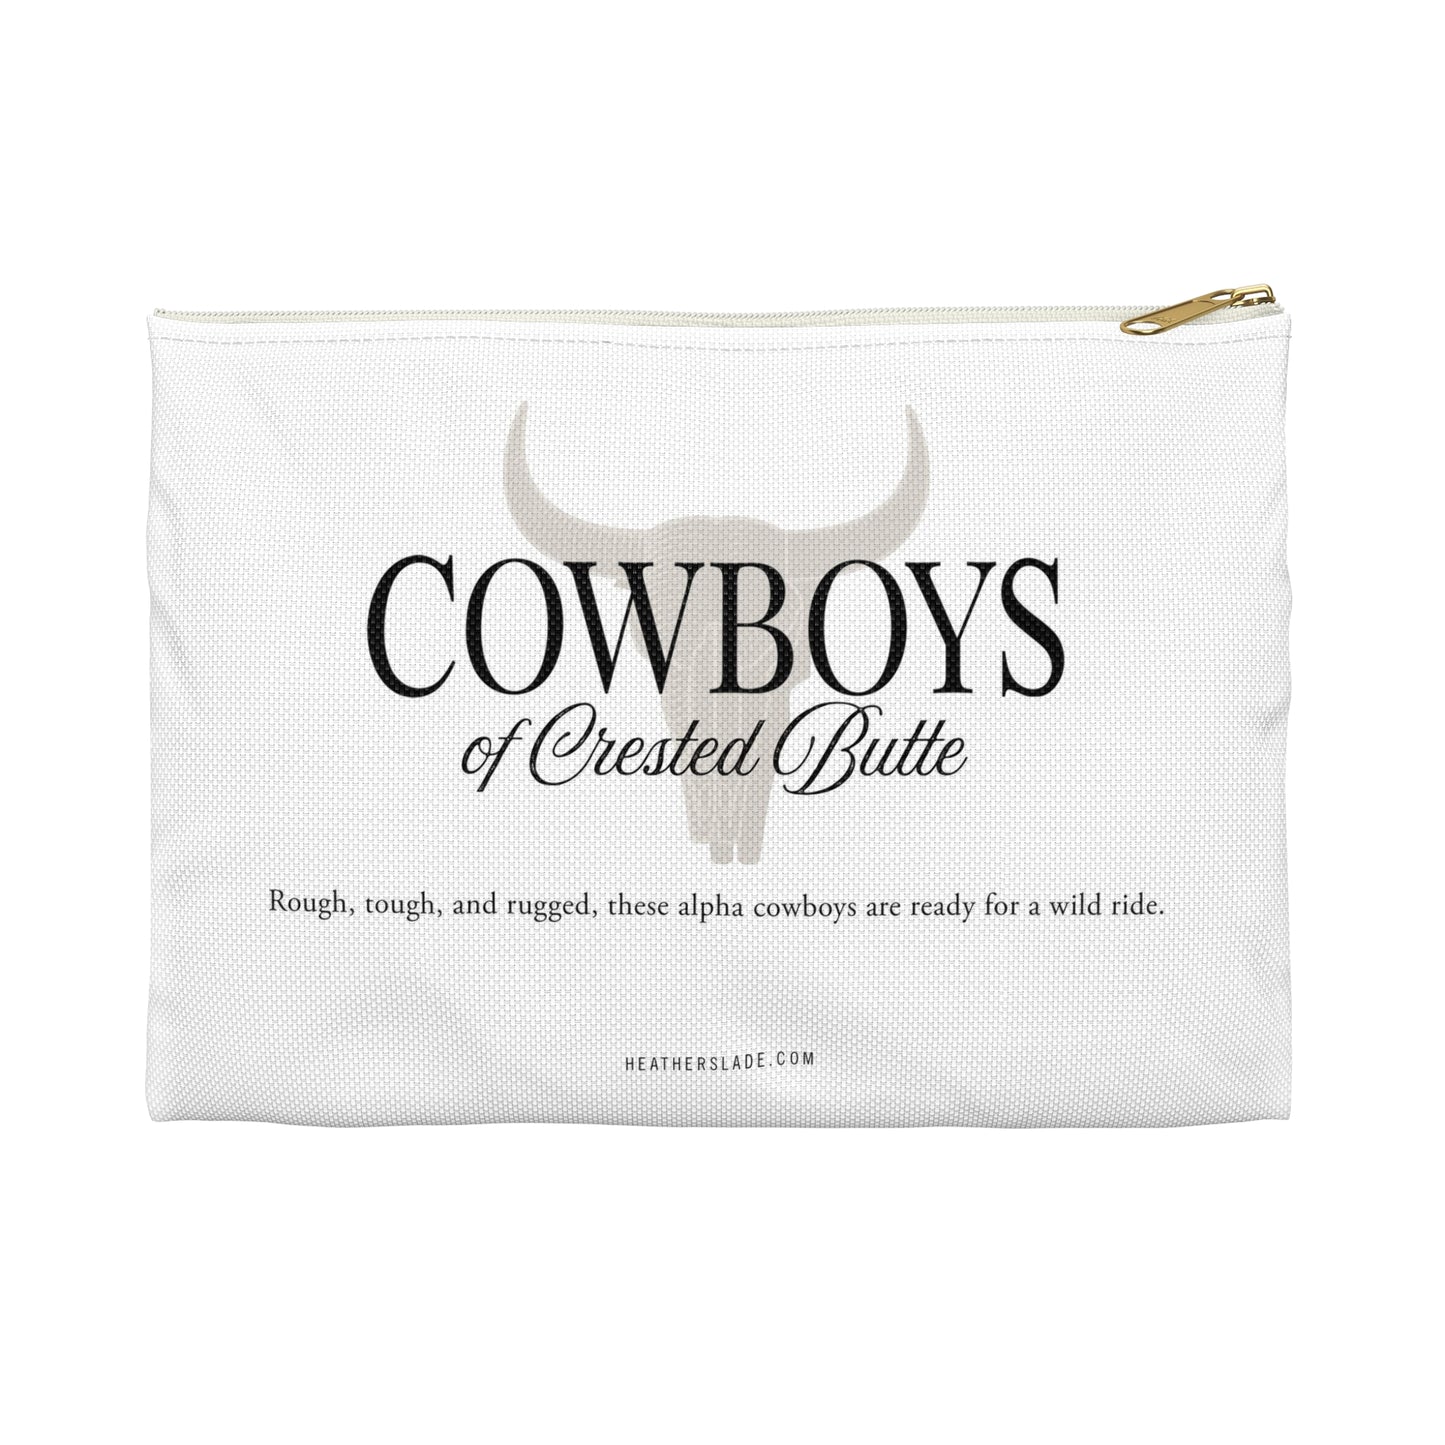 Cowboys of Crested Butte Accessory Pouch